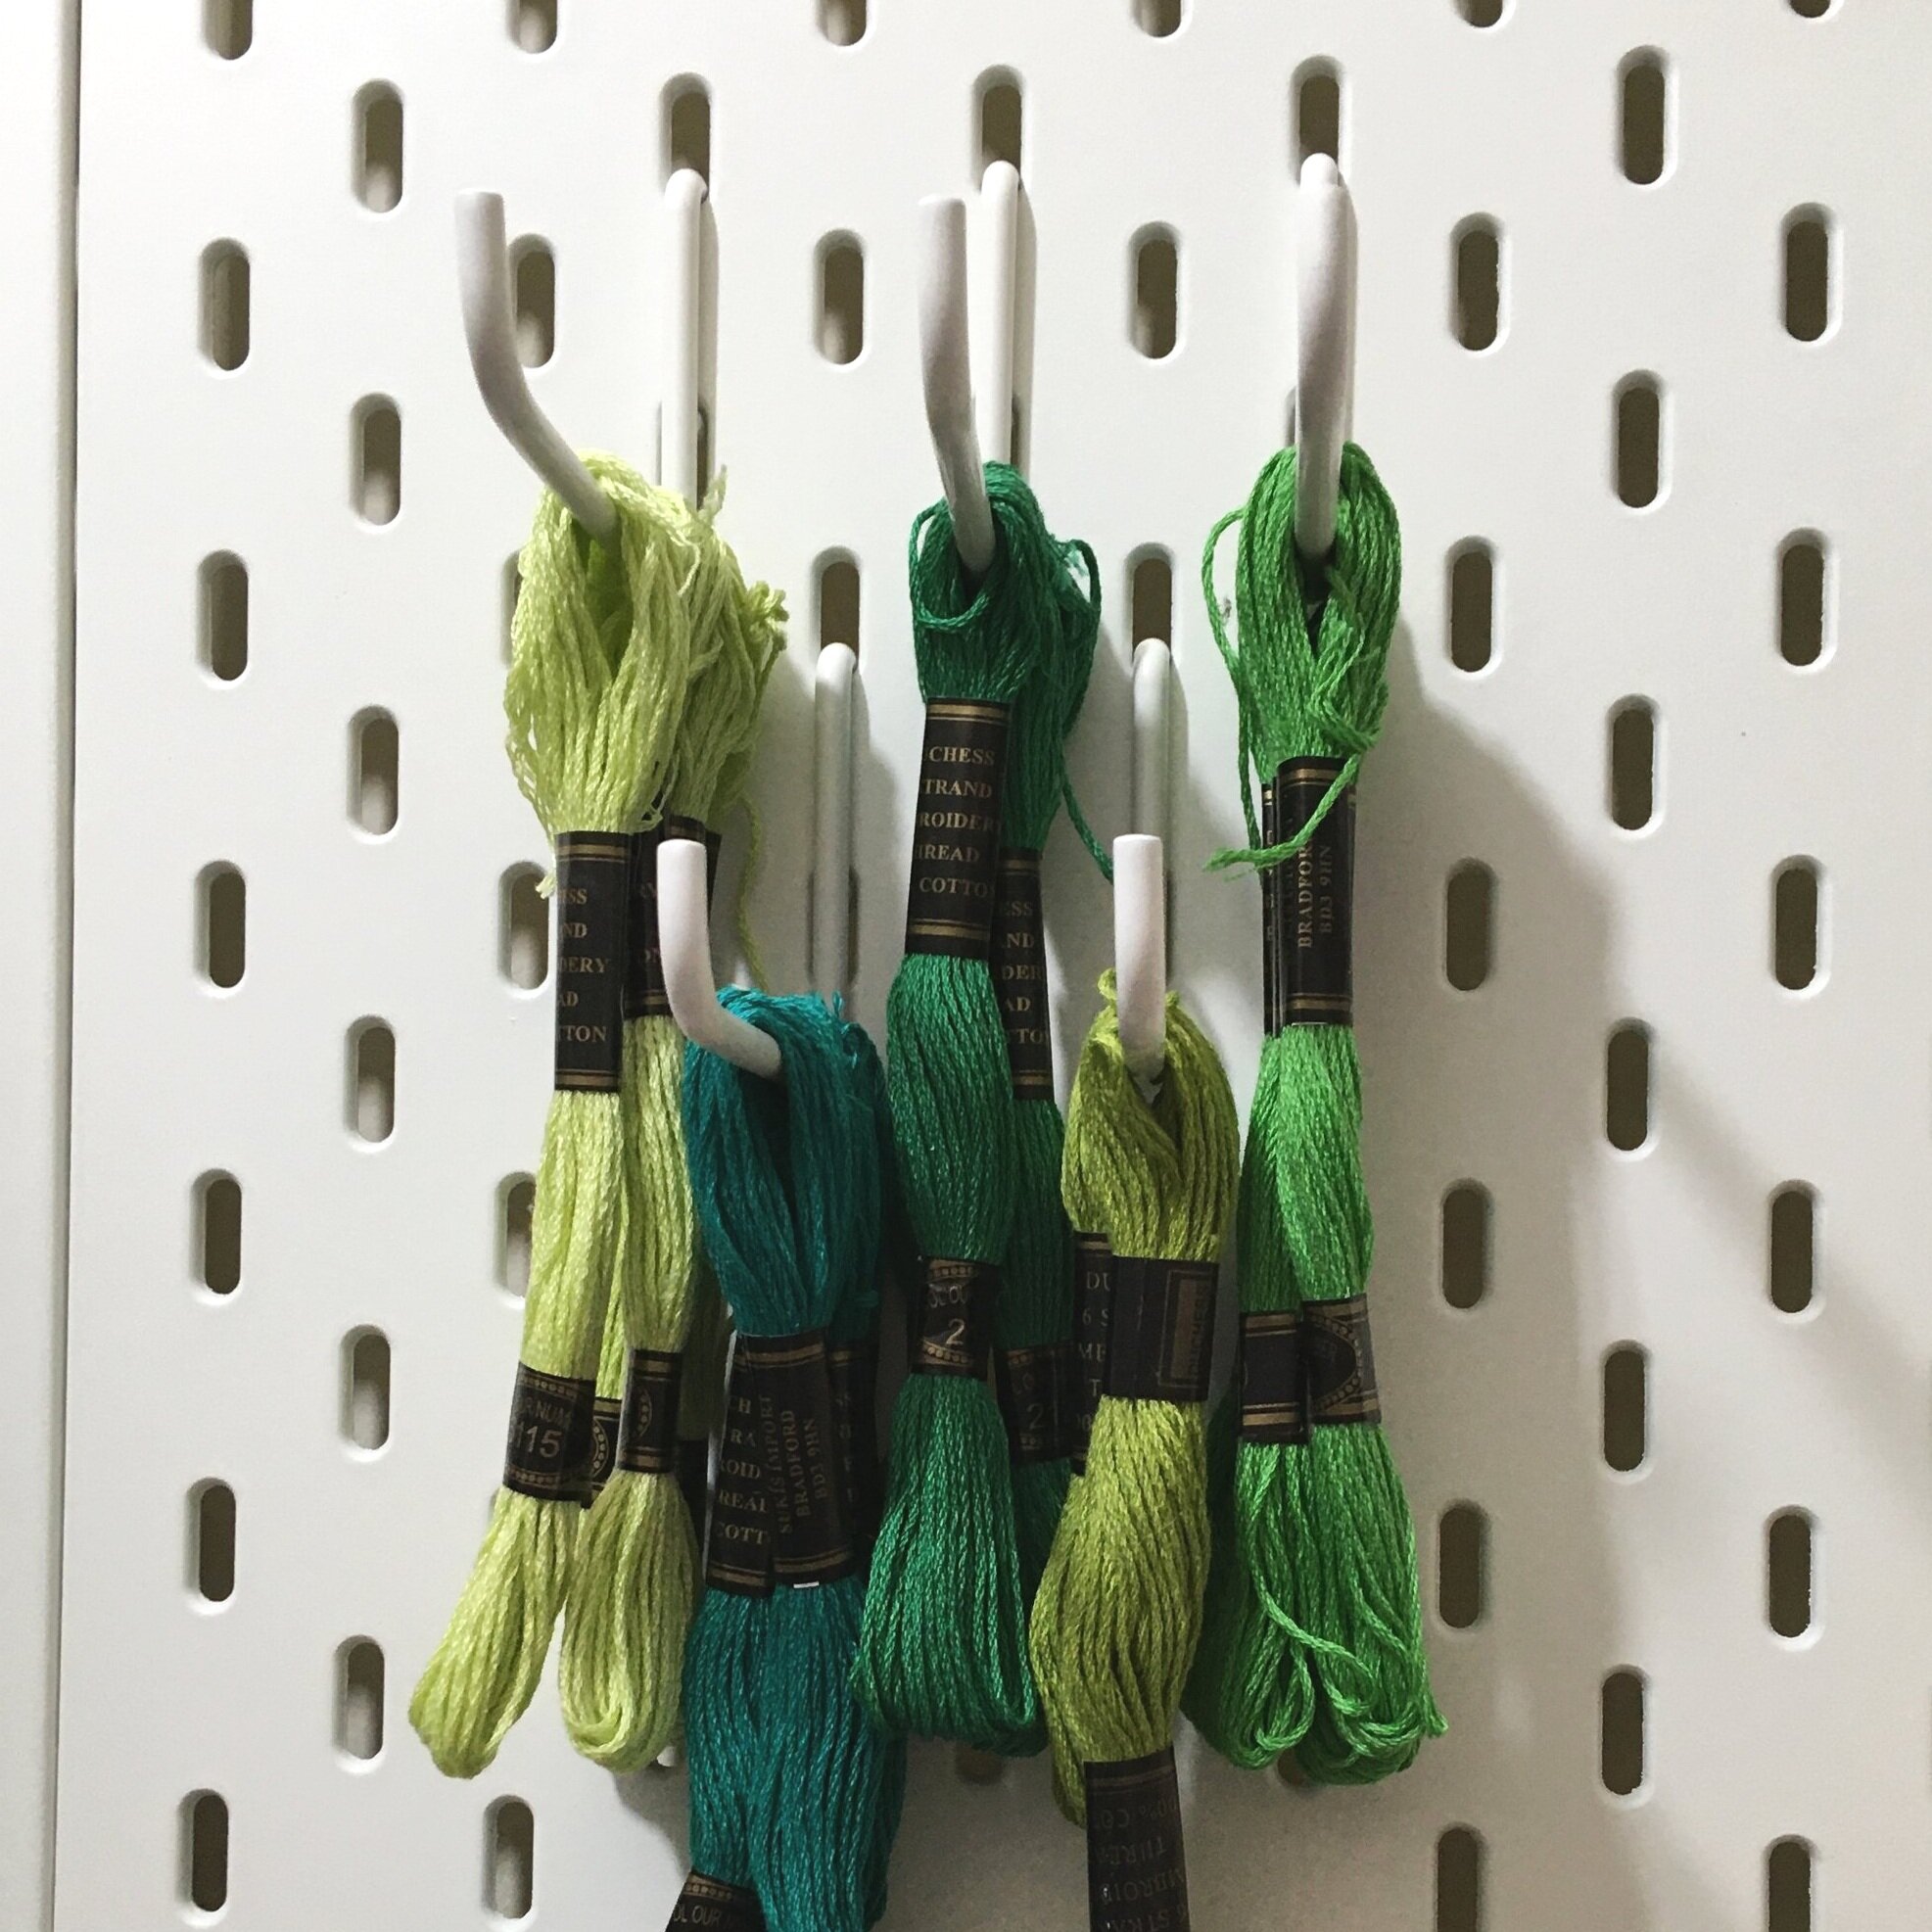 How I store my embroidery thread